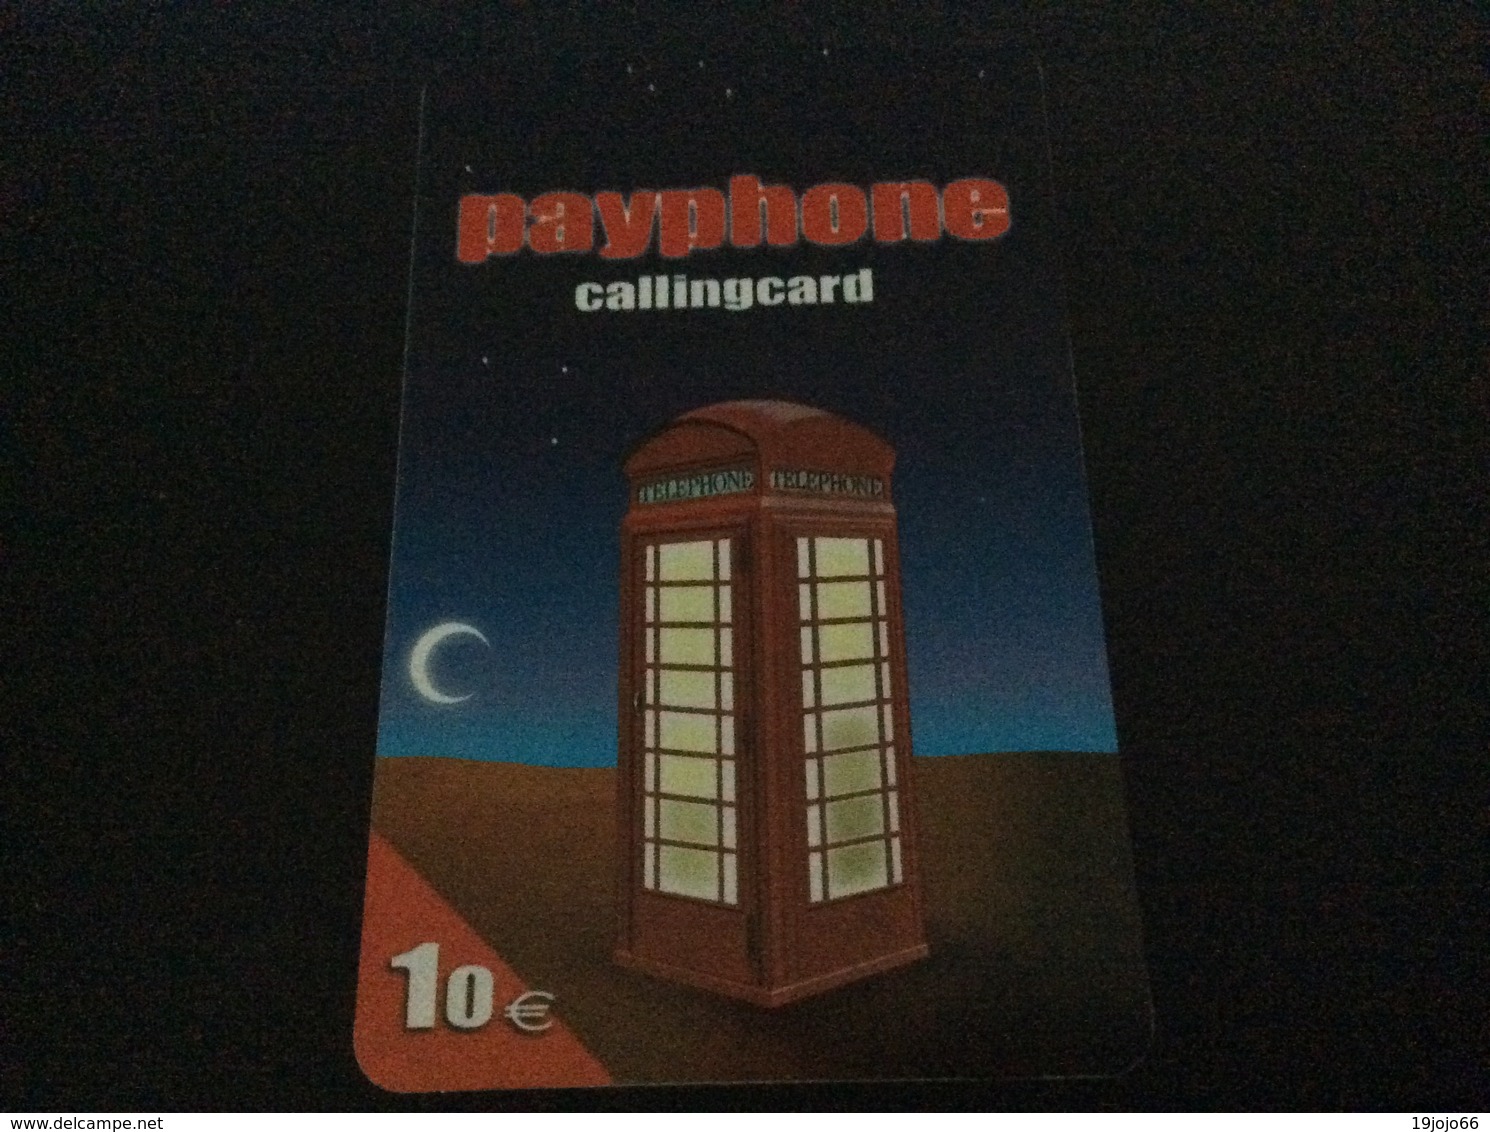 10 Euro Payphone - Red Phone House  - Formula One   -  Little Printed  -   Used Condition - [2] Prepaid